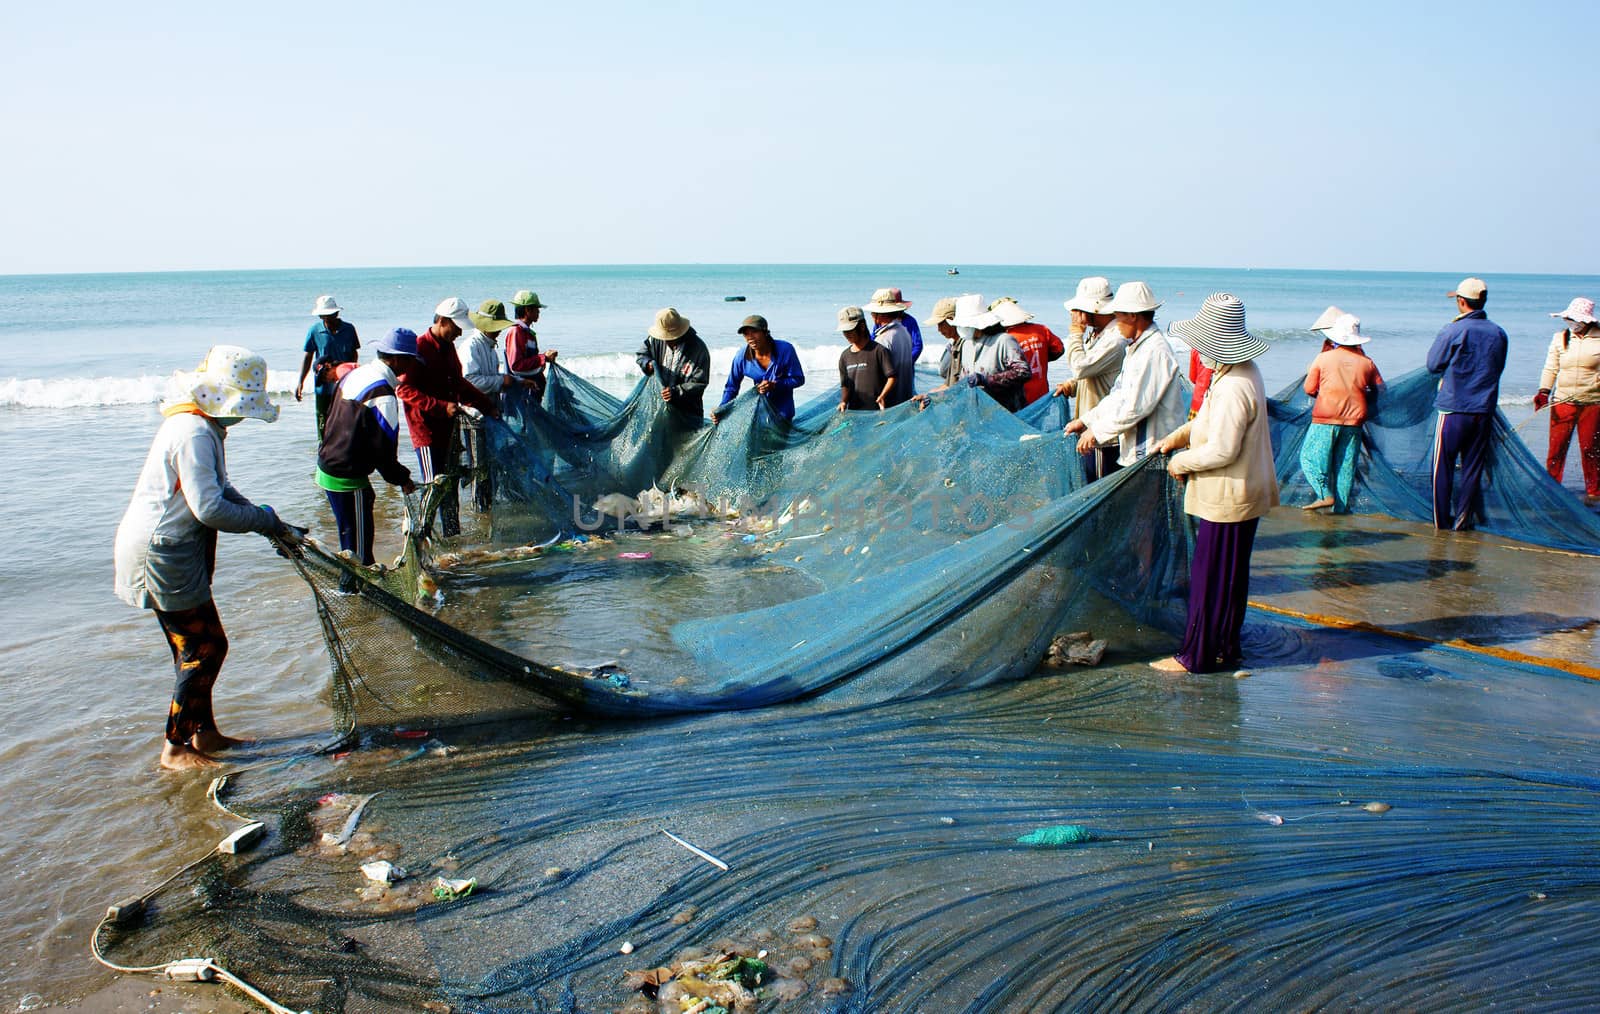 BINH THUAN, VIETNAM- JAN 22: Crowded atmosphere on beach with impression 's group of fisherman pull fish net, row of people with long net in hand, Viet Nam, Jan 22, 2014                         